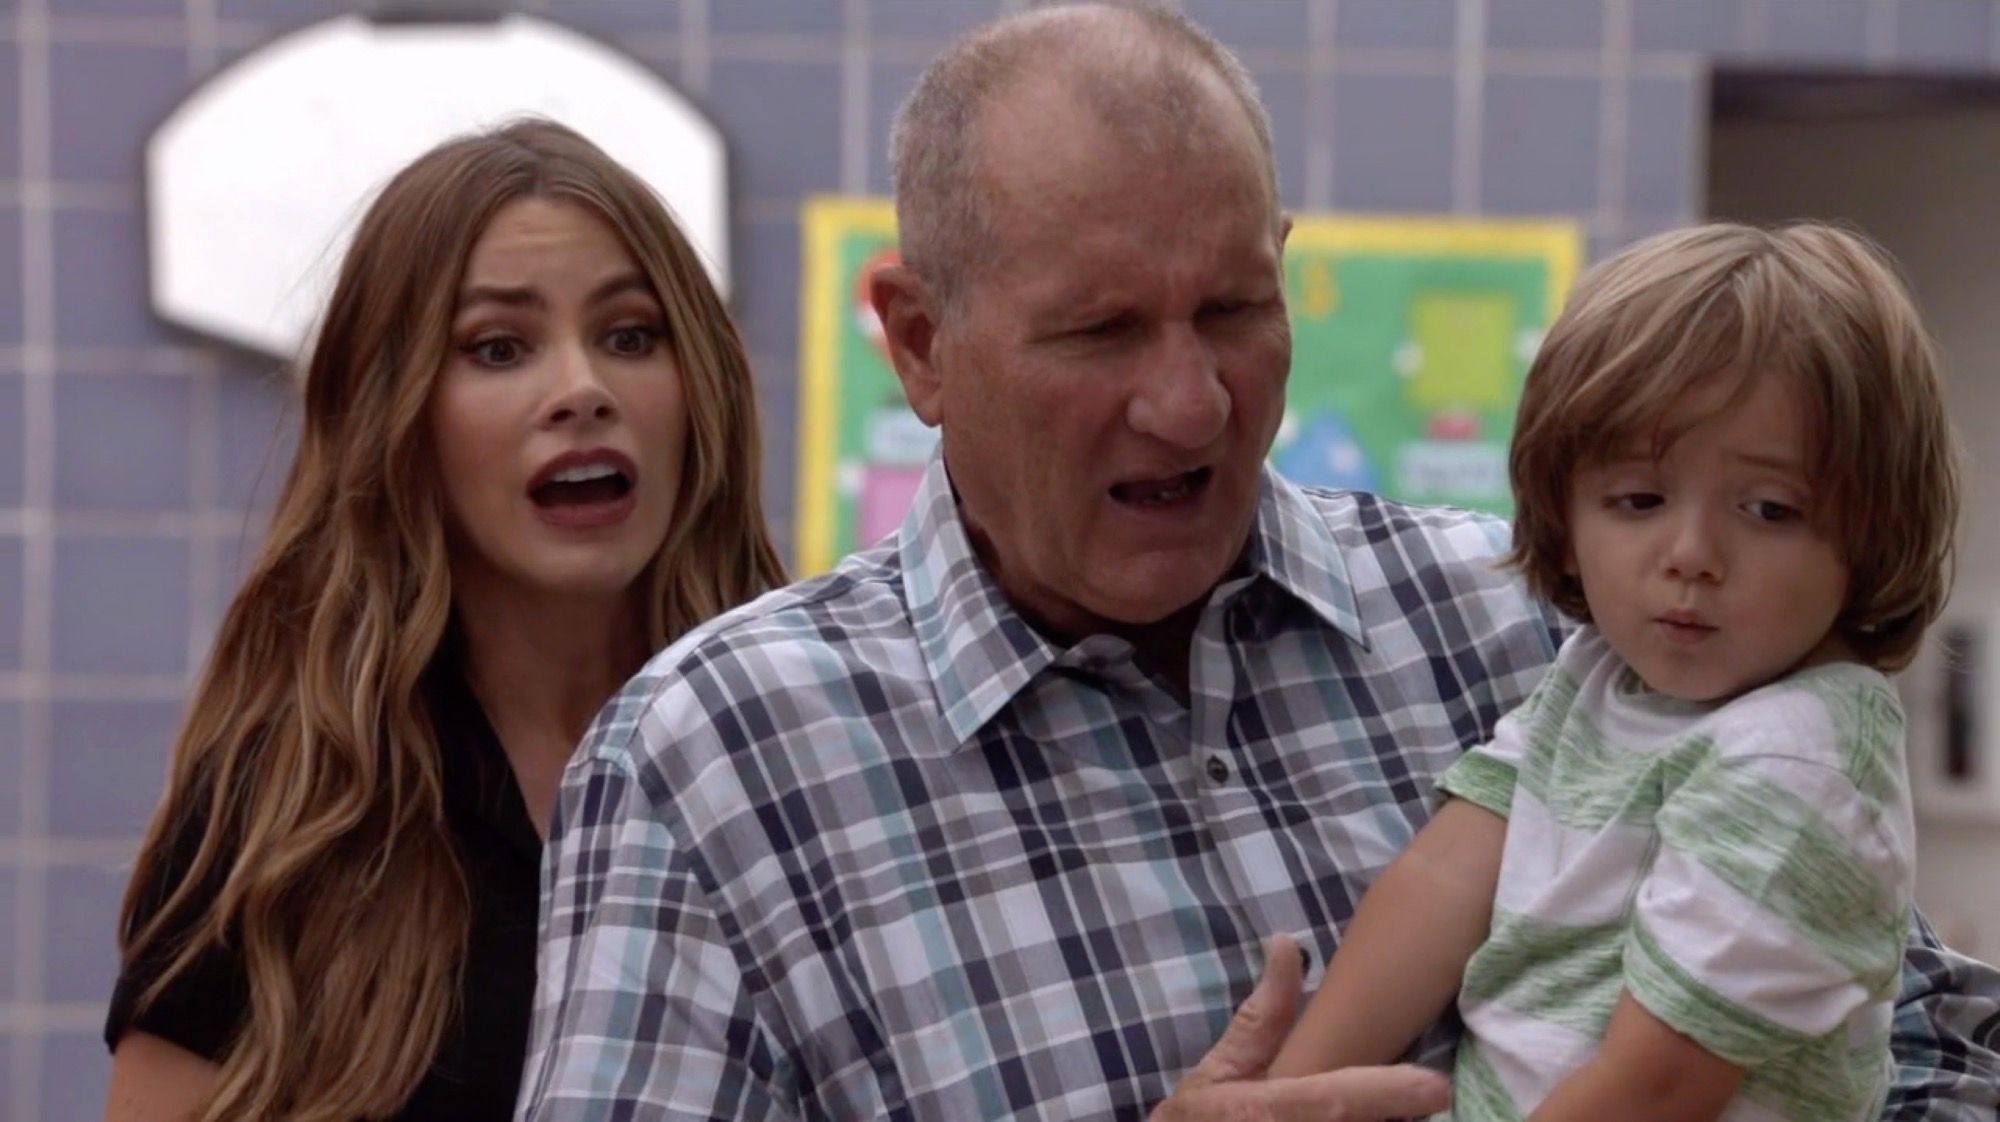 The 10 Worst Episodes Of Modern Family According To IMDb